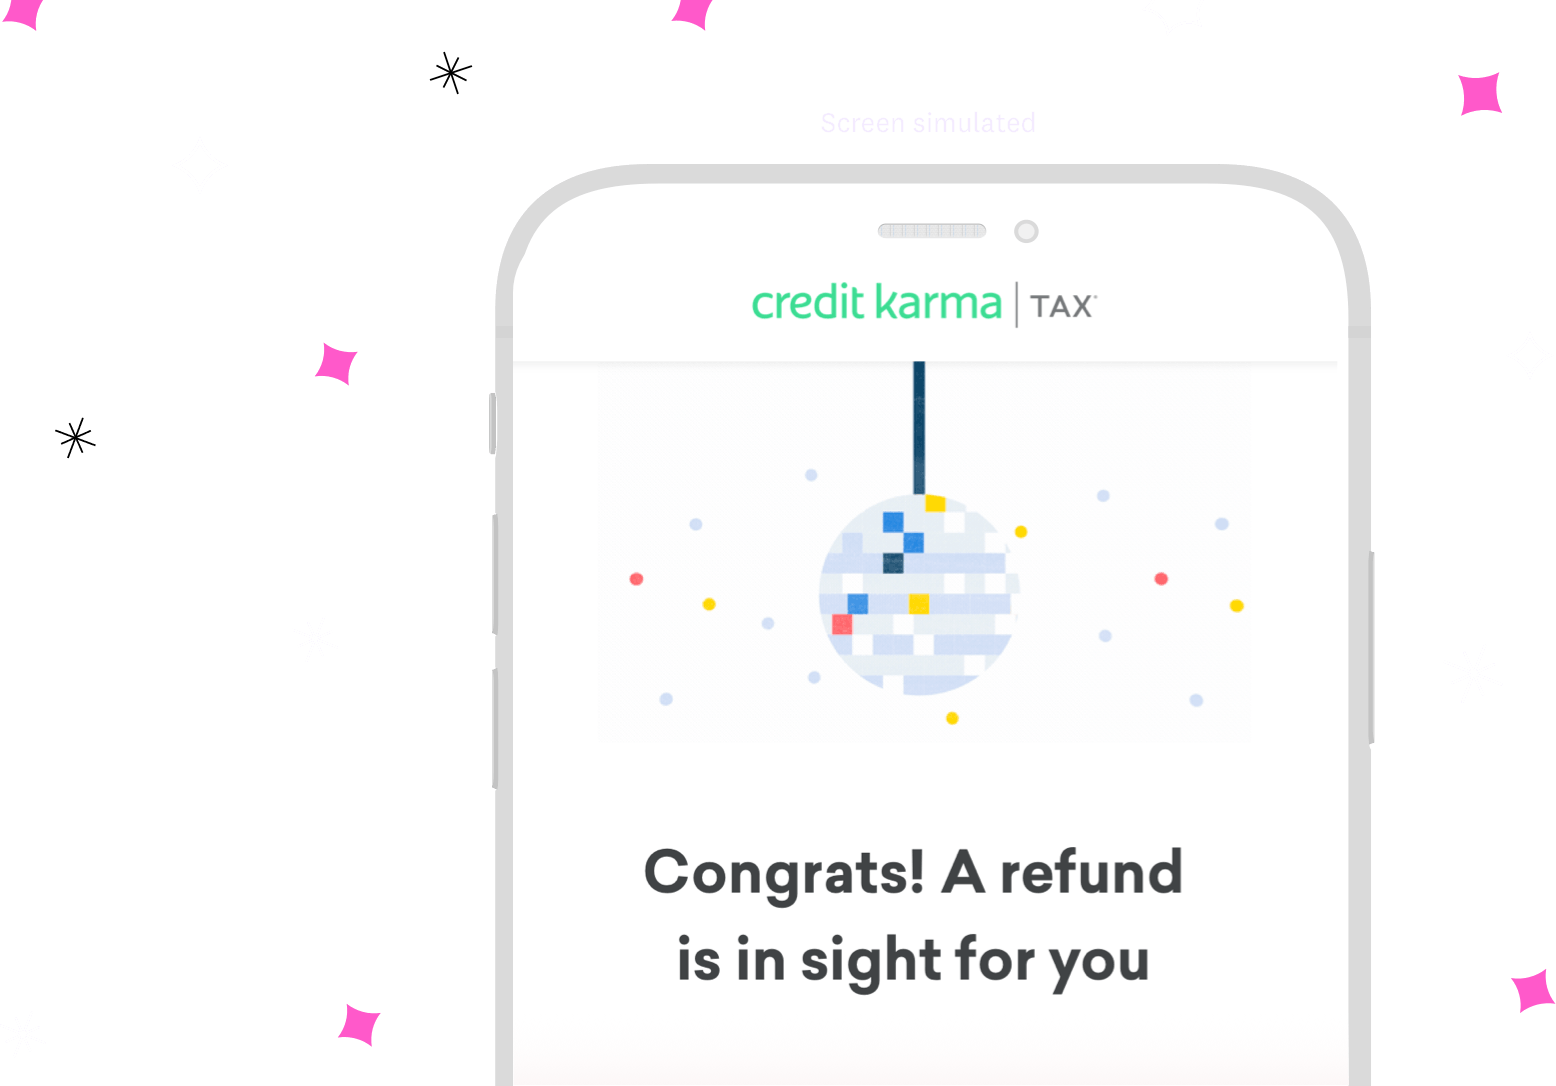 Credit Karma Tax on phone with disco ball and text of "Congrats! A refund is in sight for you."